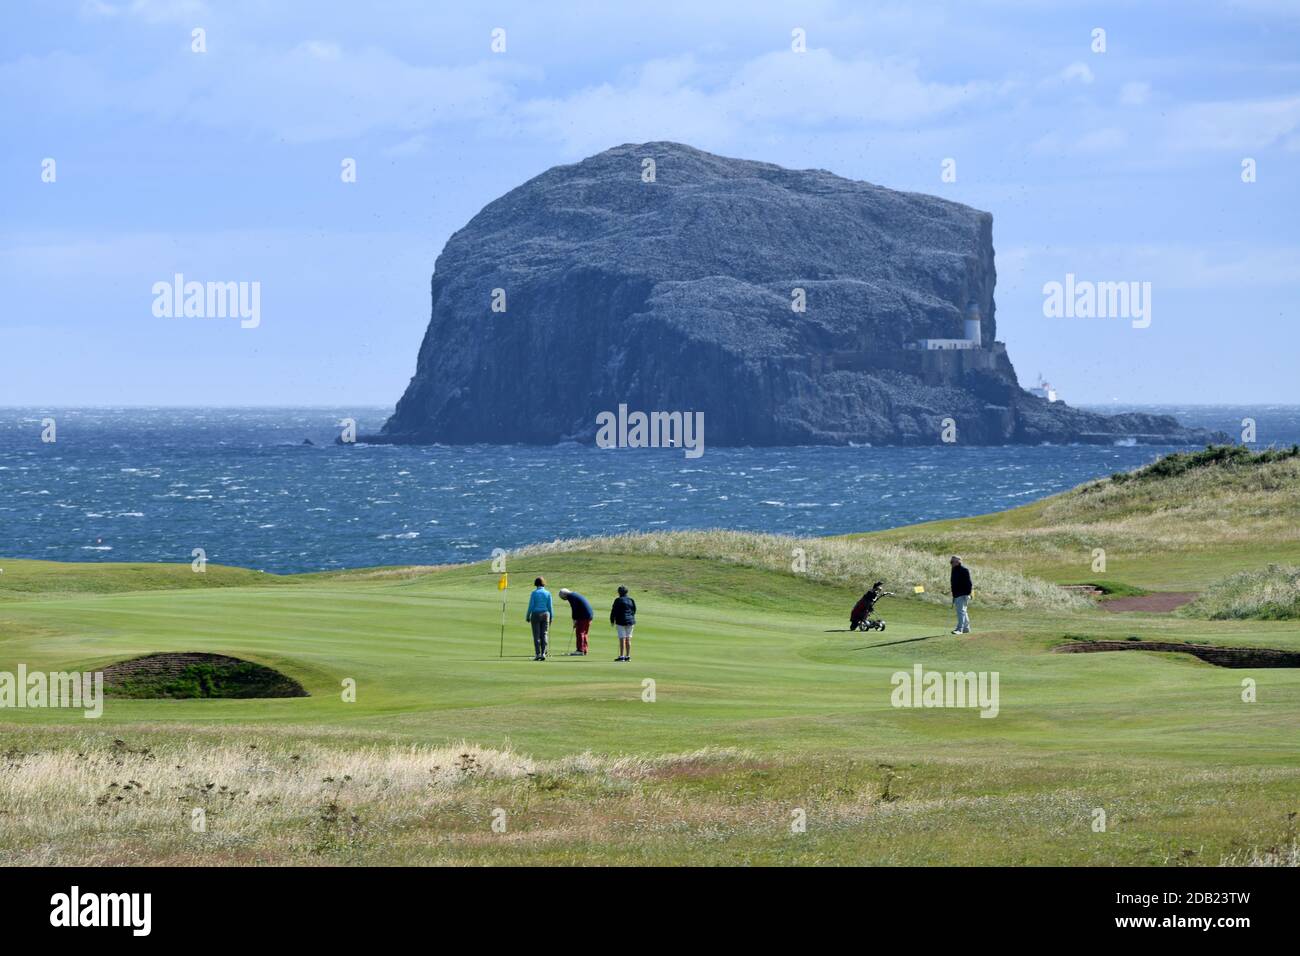 Picture shows golfers playing a round of golf at Glen Club, North Berwick, Scotland, with the backdrop of The Bass Rock and The Firth of Forth. Stock Photo